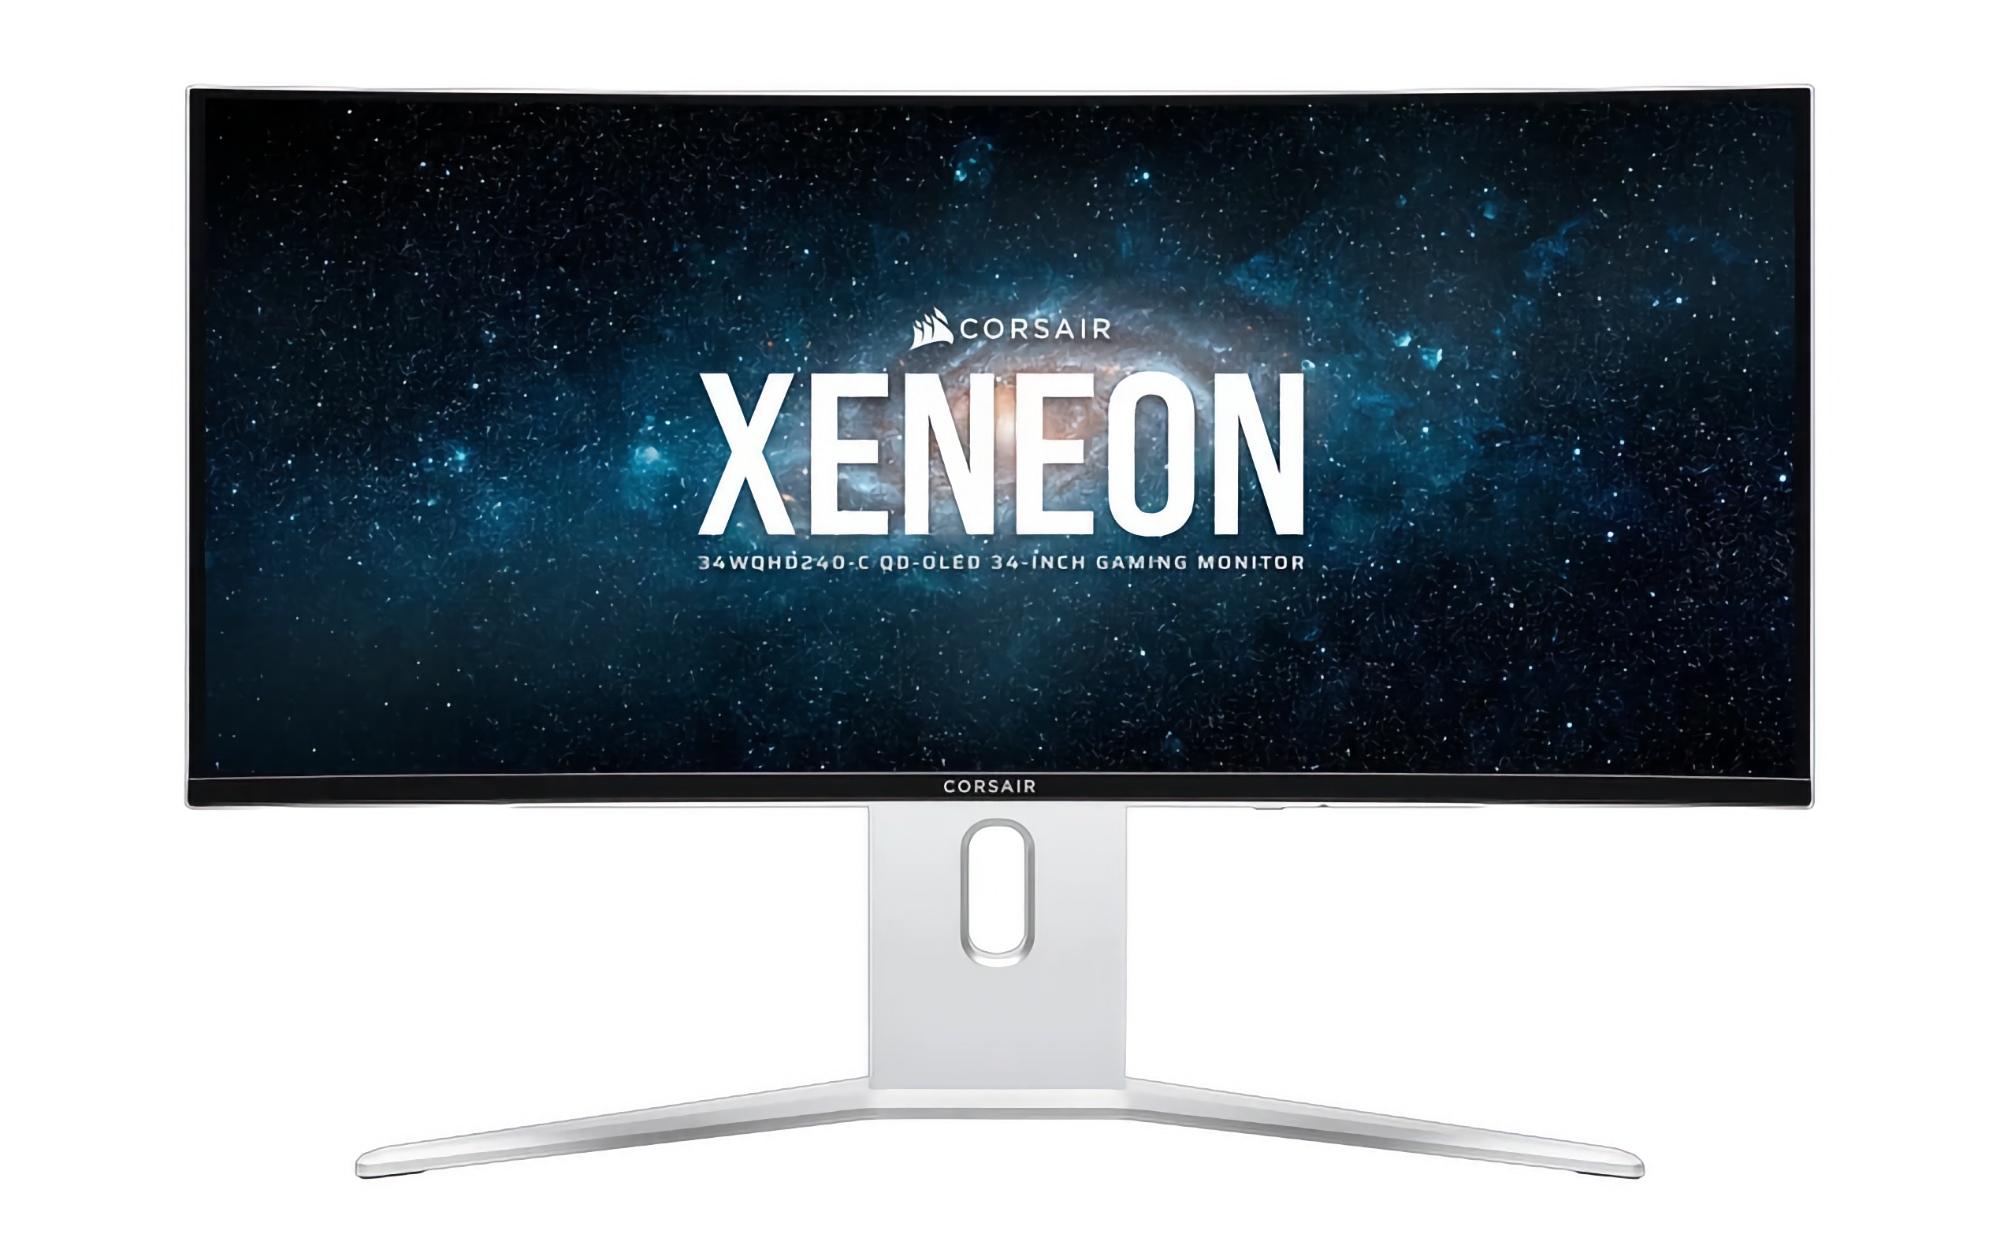 Corsair XENEON 34WQHD240-C: Gaming monitor with 34-inch 240Hz curved QD-OLED screen